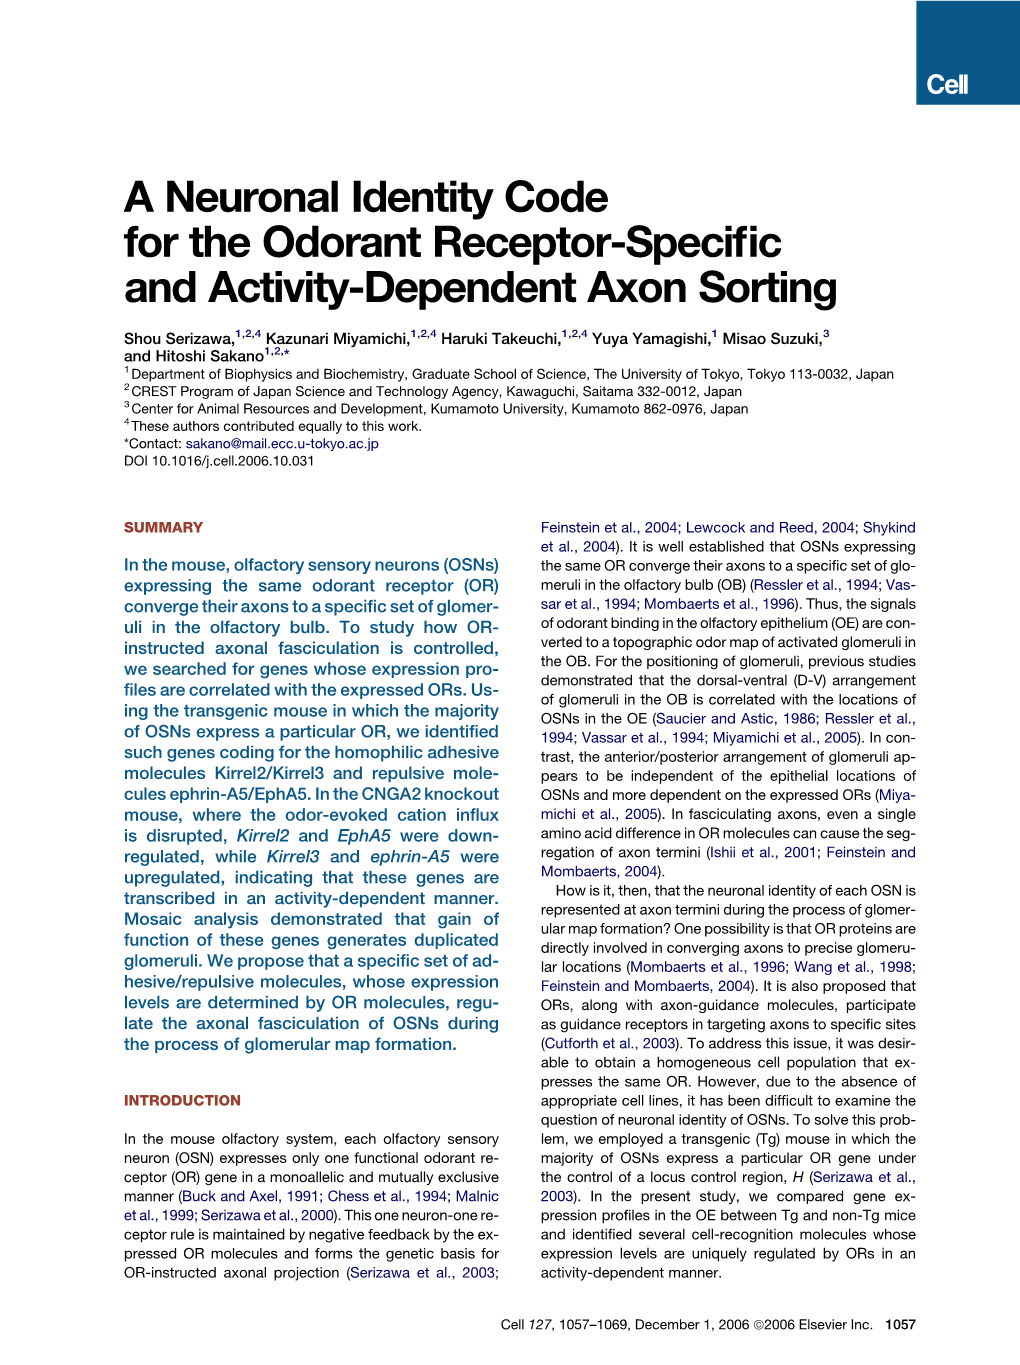 A Neuronal Identity Code for the Odorant Receptor-Specific